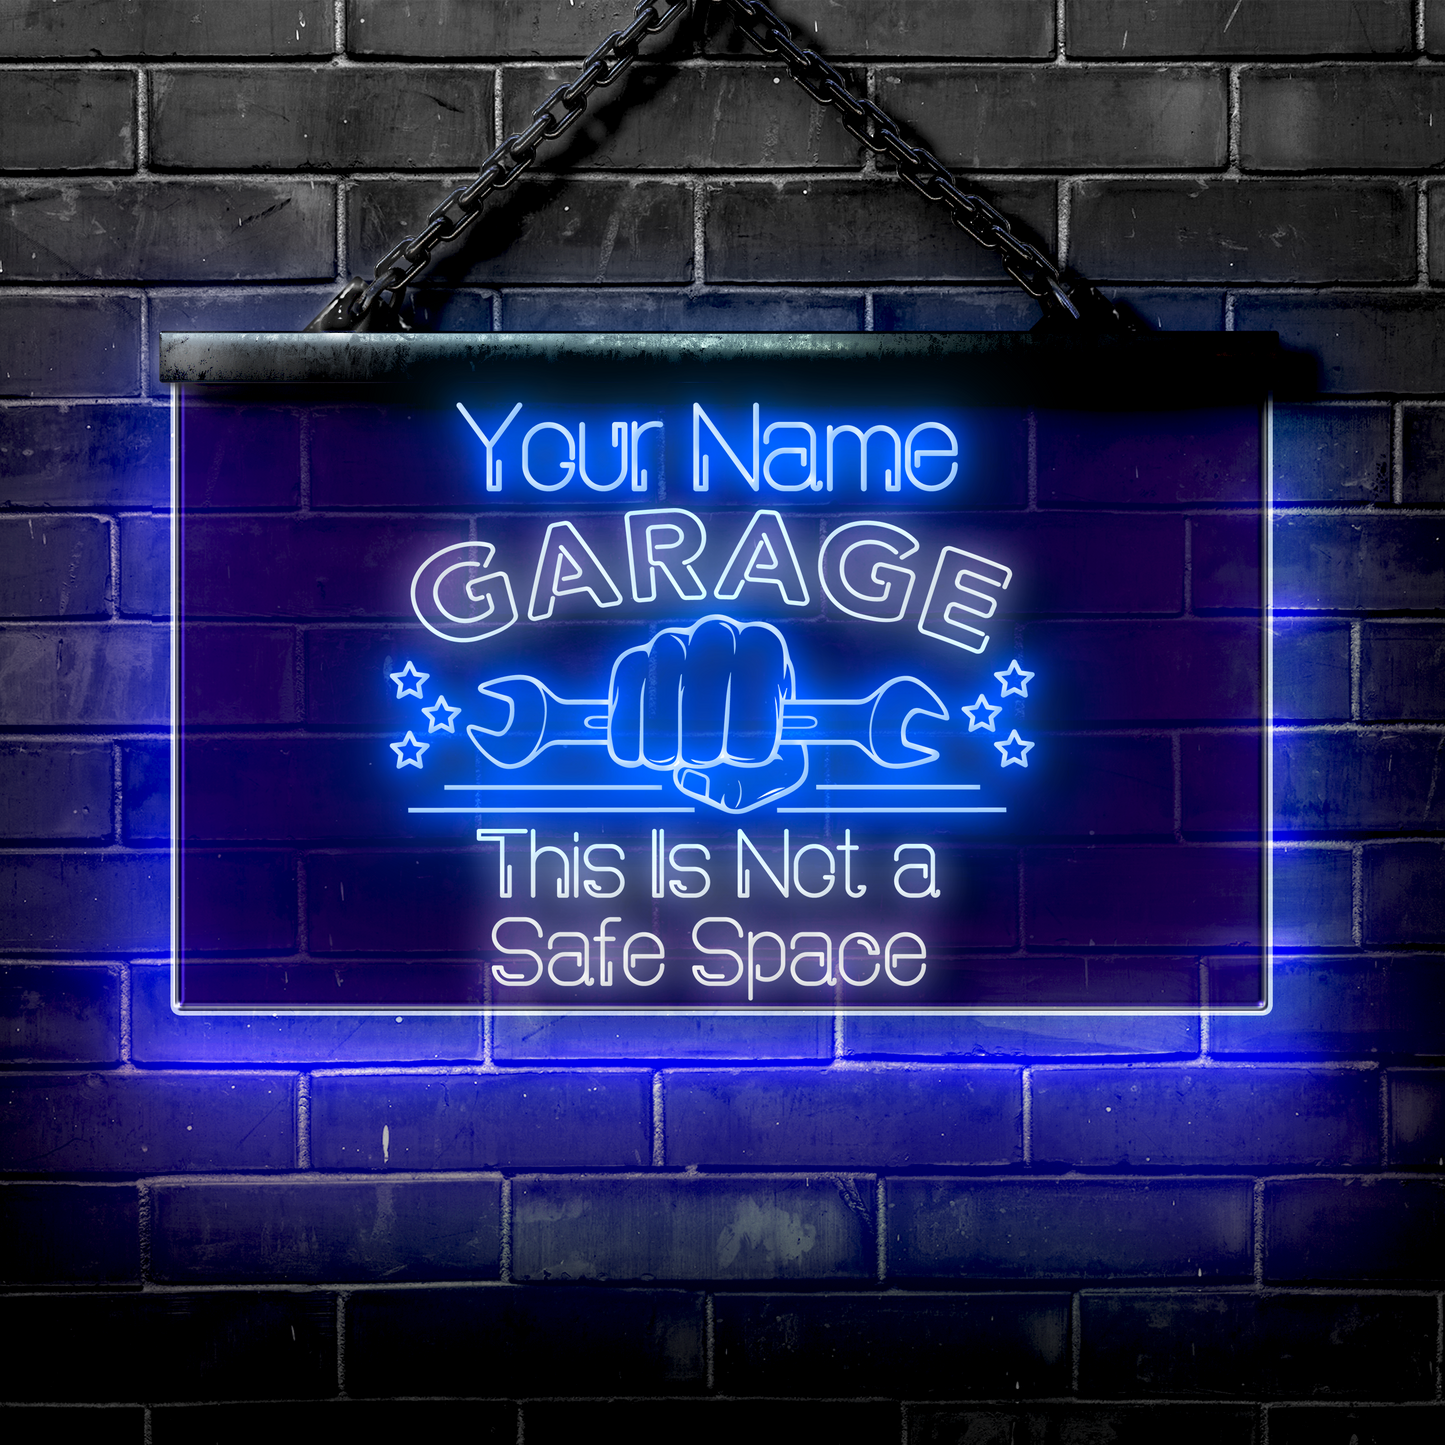 Personalized LED Garage Sign: This Is Not a Safe Space